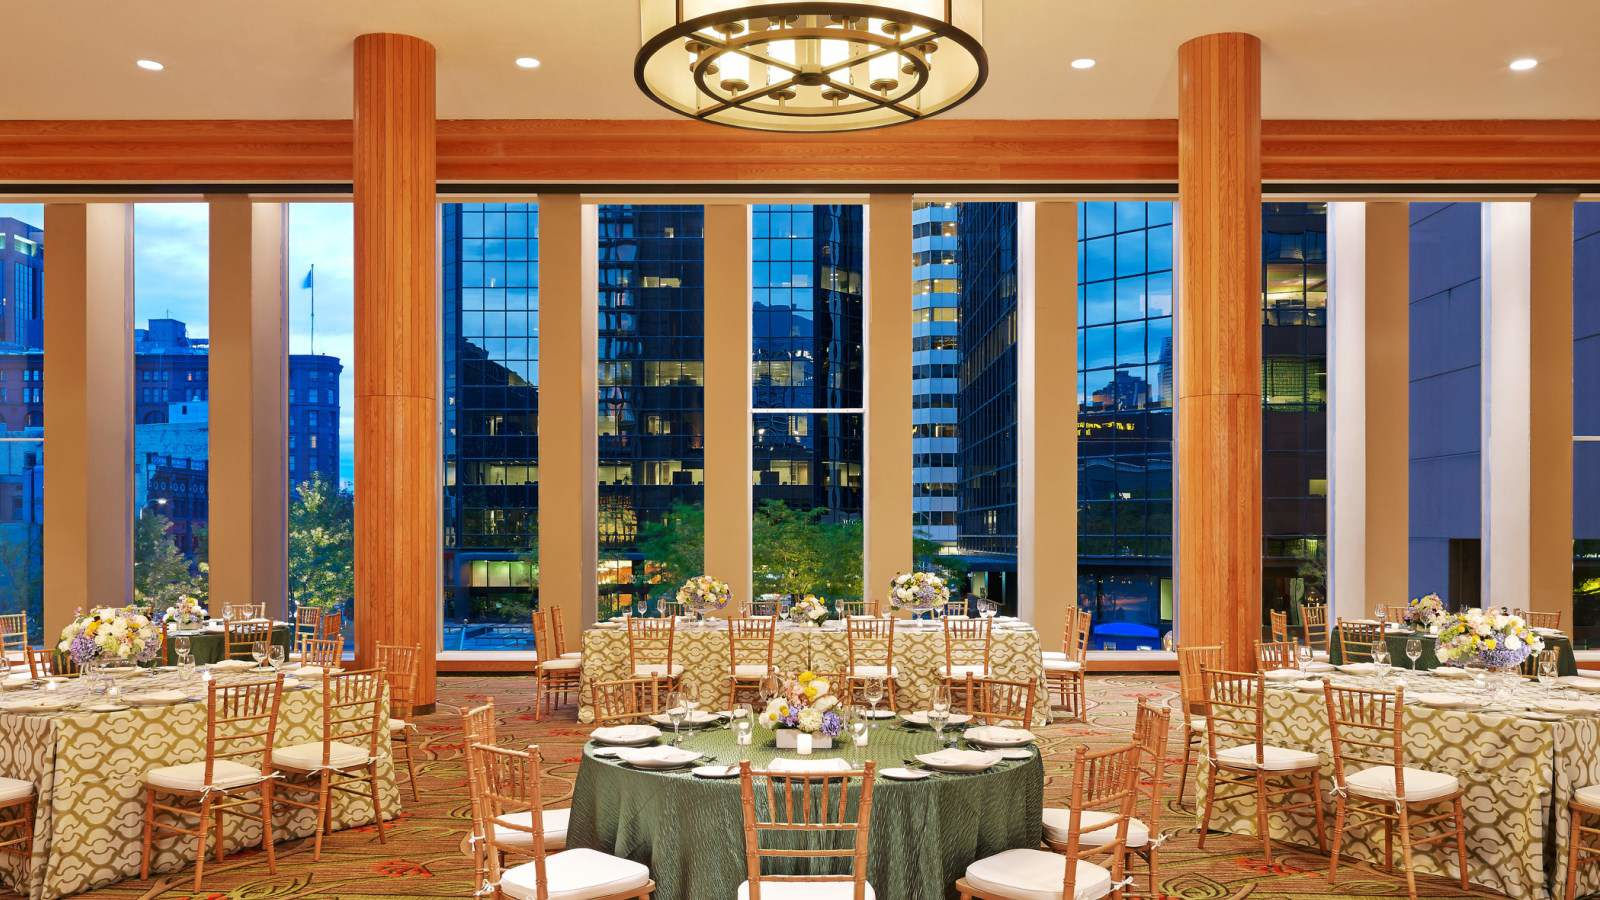 Amazing Wedding Reception Venues Denver in the world Learn more here 